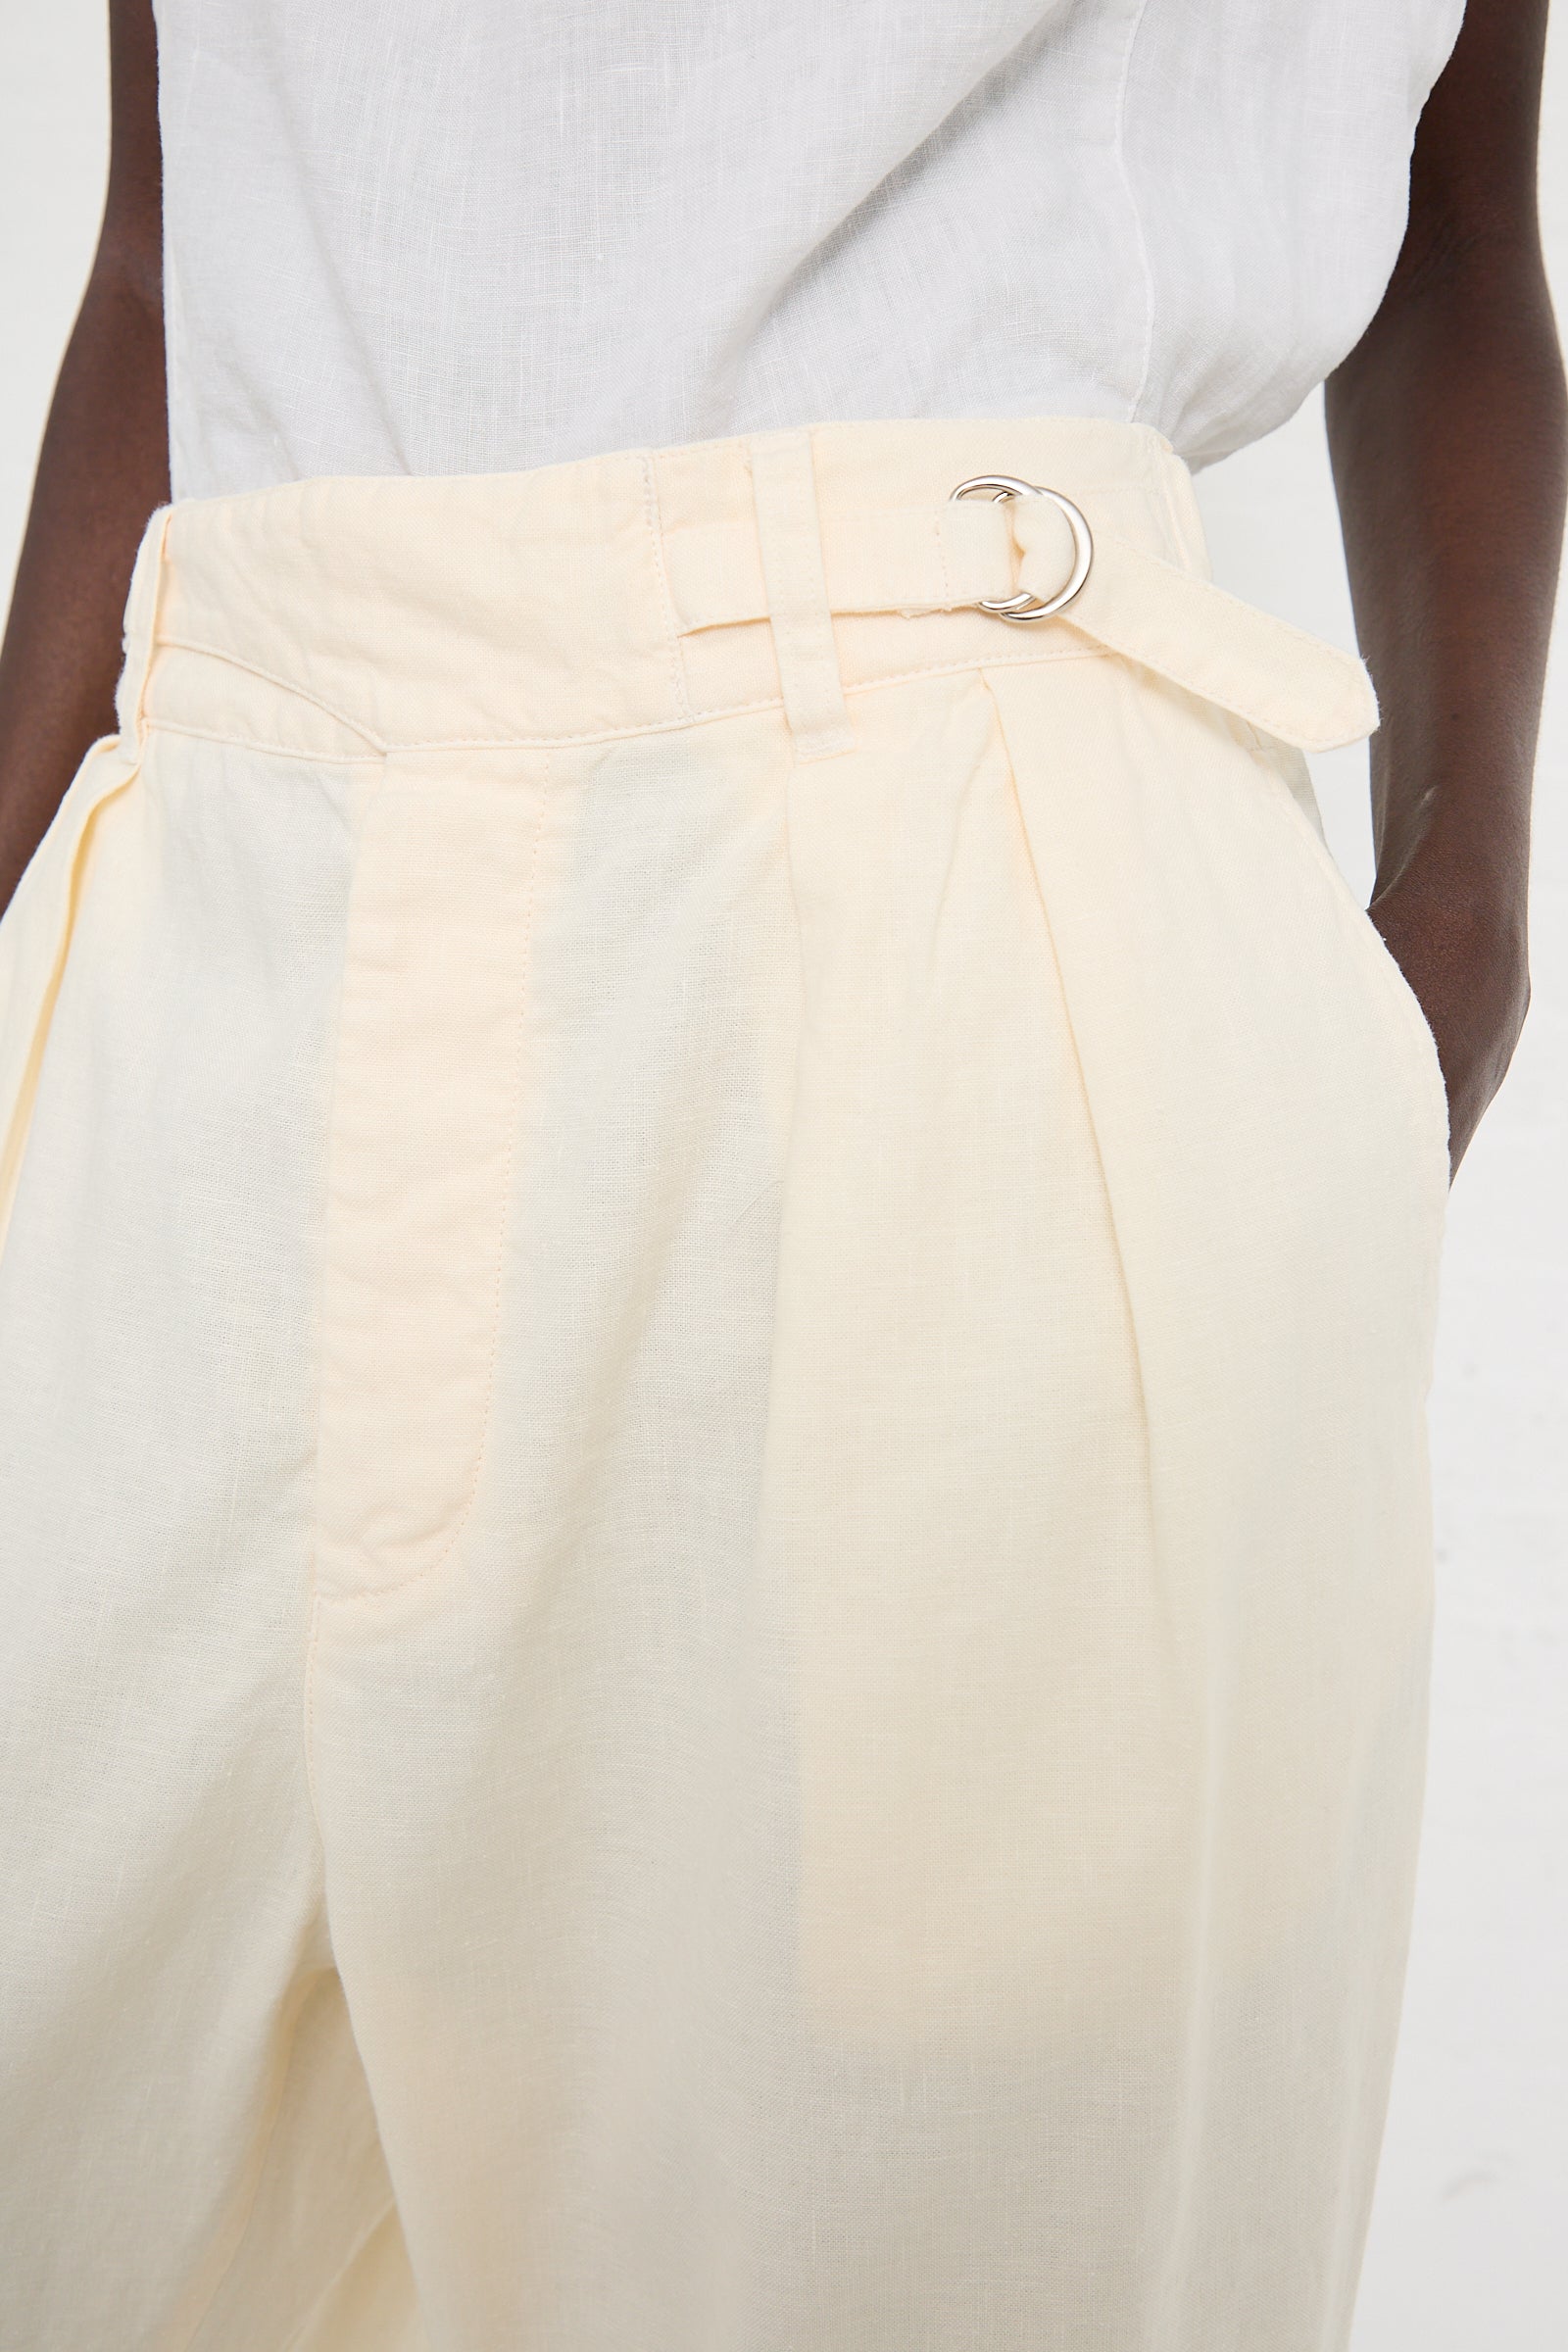 Close-up of a person wearing nest Robe Linen Cotton Blend Gurkah Pant in Off White with a belt and D-ring buckle. Their hands are in the pants' pockets, and they are also wearing a white top.